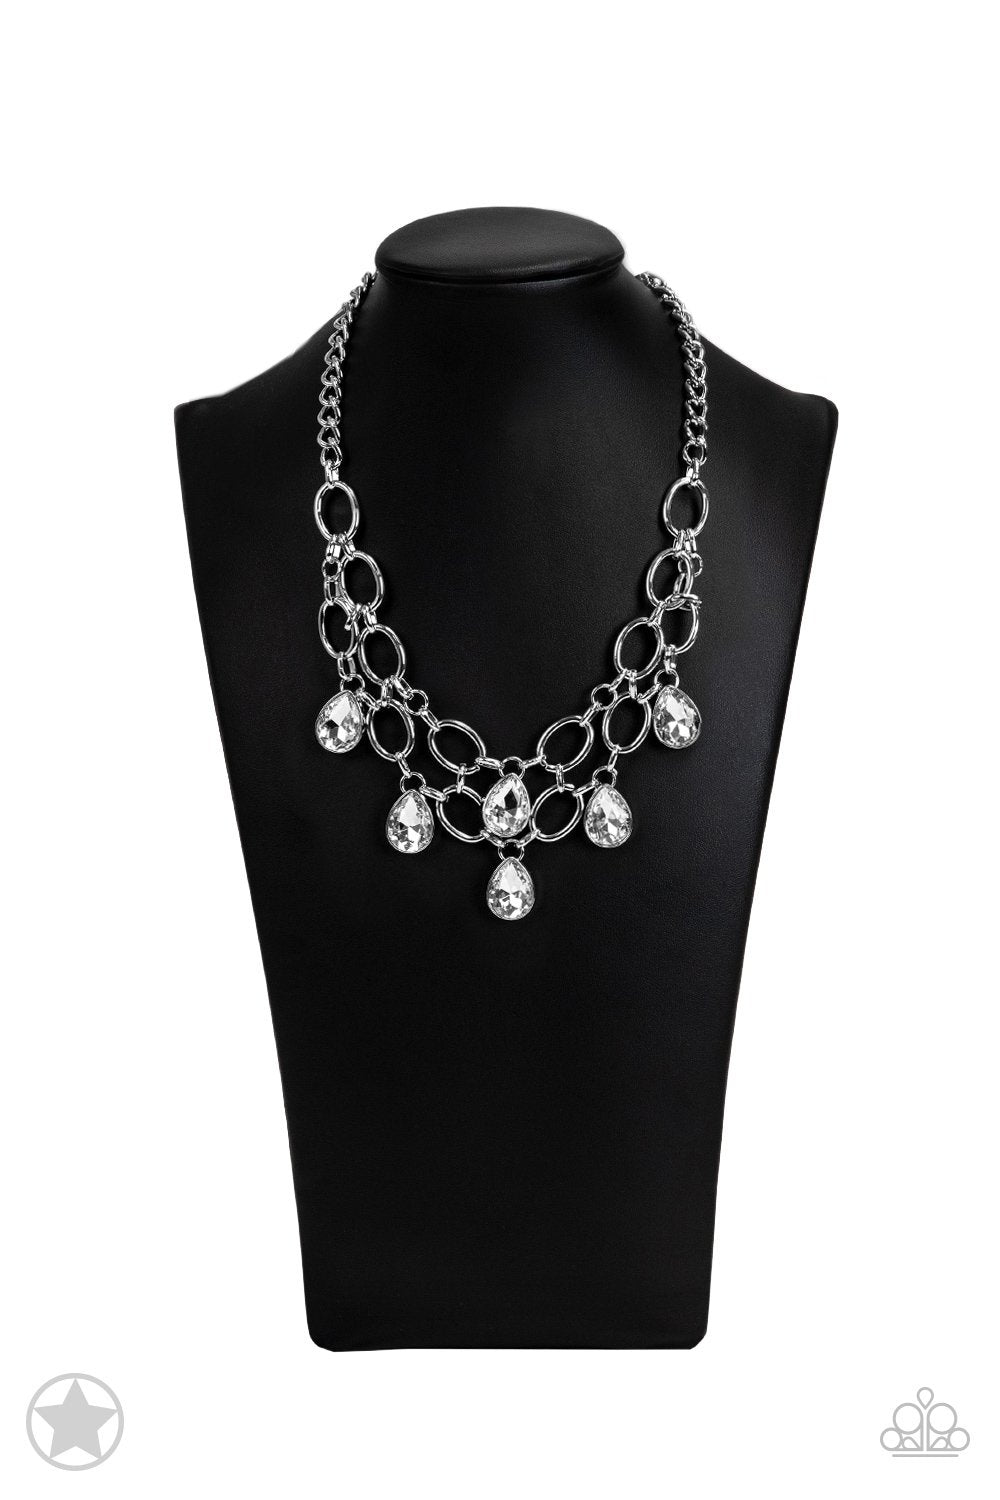 Show-Stopping Shimmer White Rhinestone Necklace - Paparazzi Accessories- on bust -CarasShop.com - $5 Jewelry by Cara Jewels